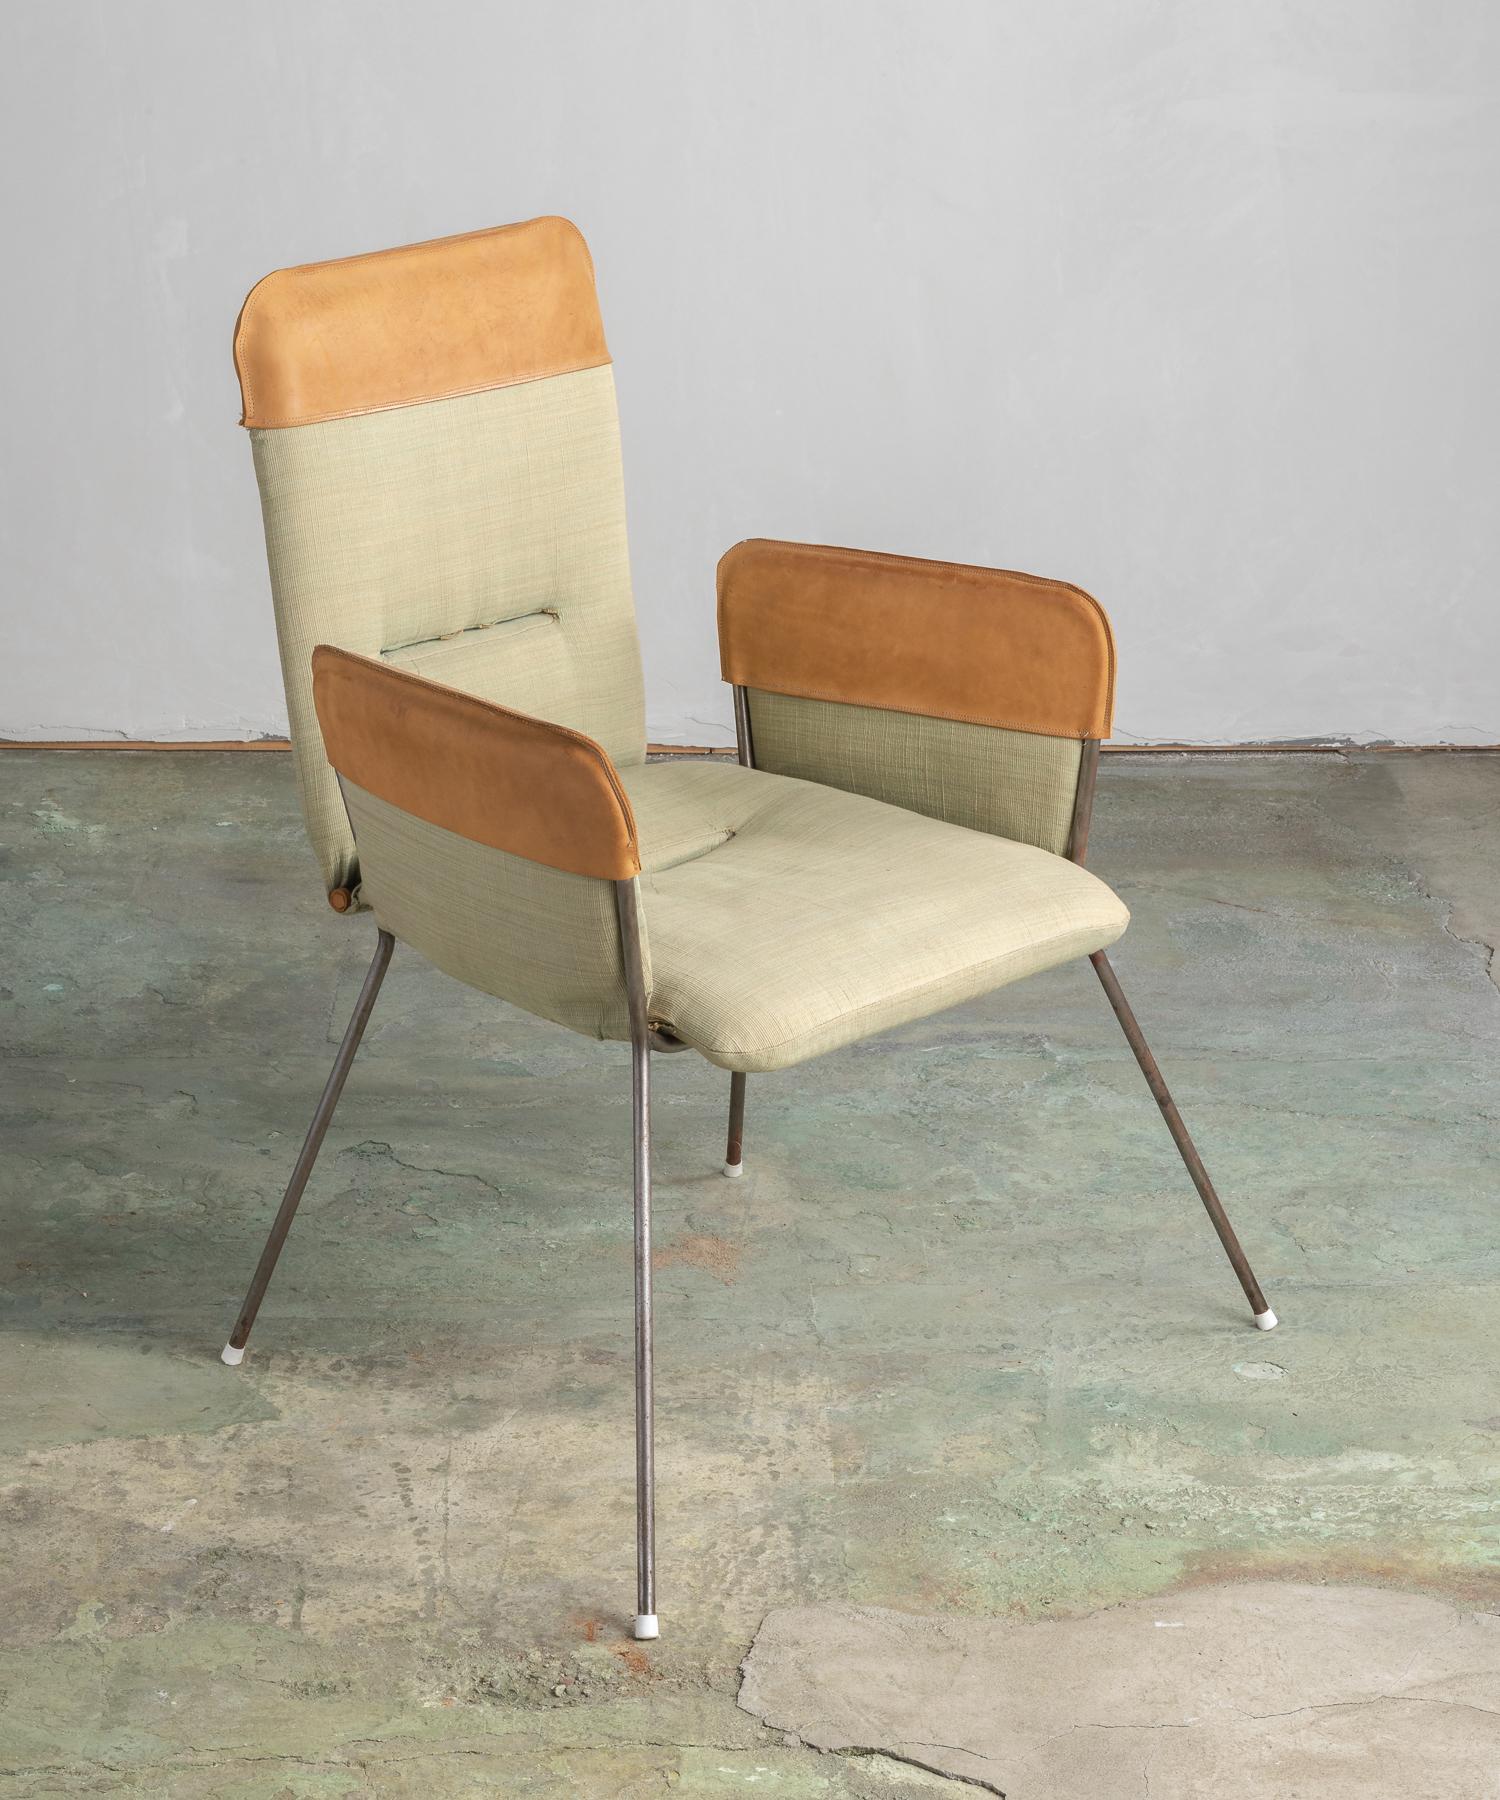 Modern armchair, America, 20th century.

Simple form includes original upholstery and leather accents.